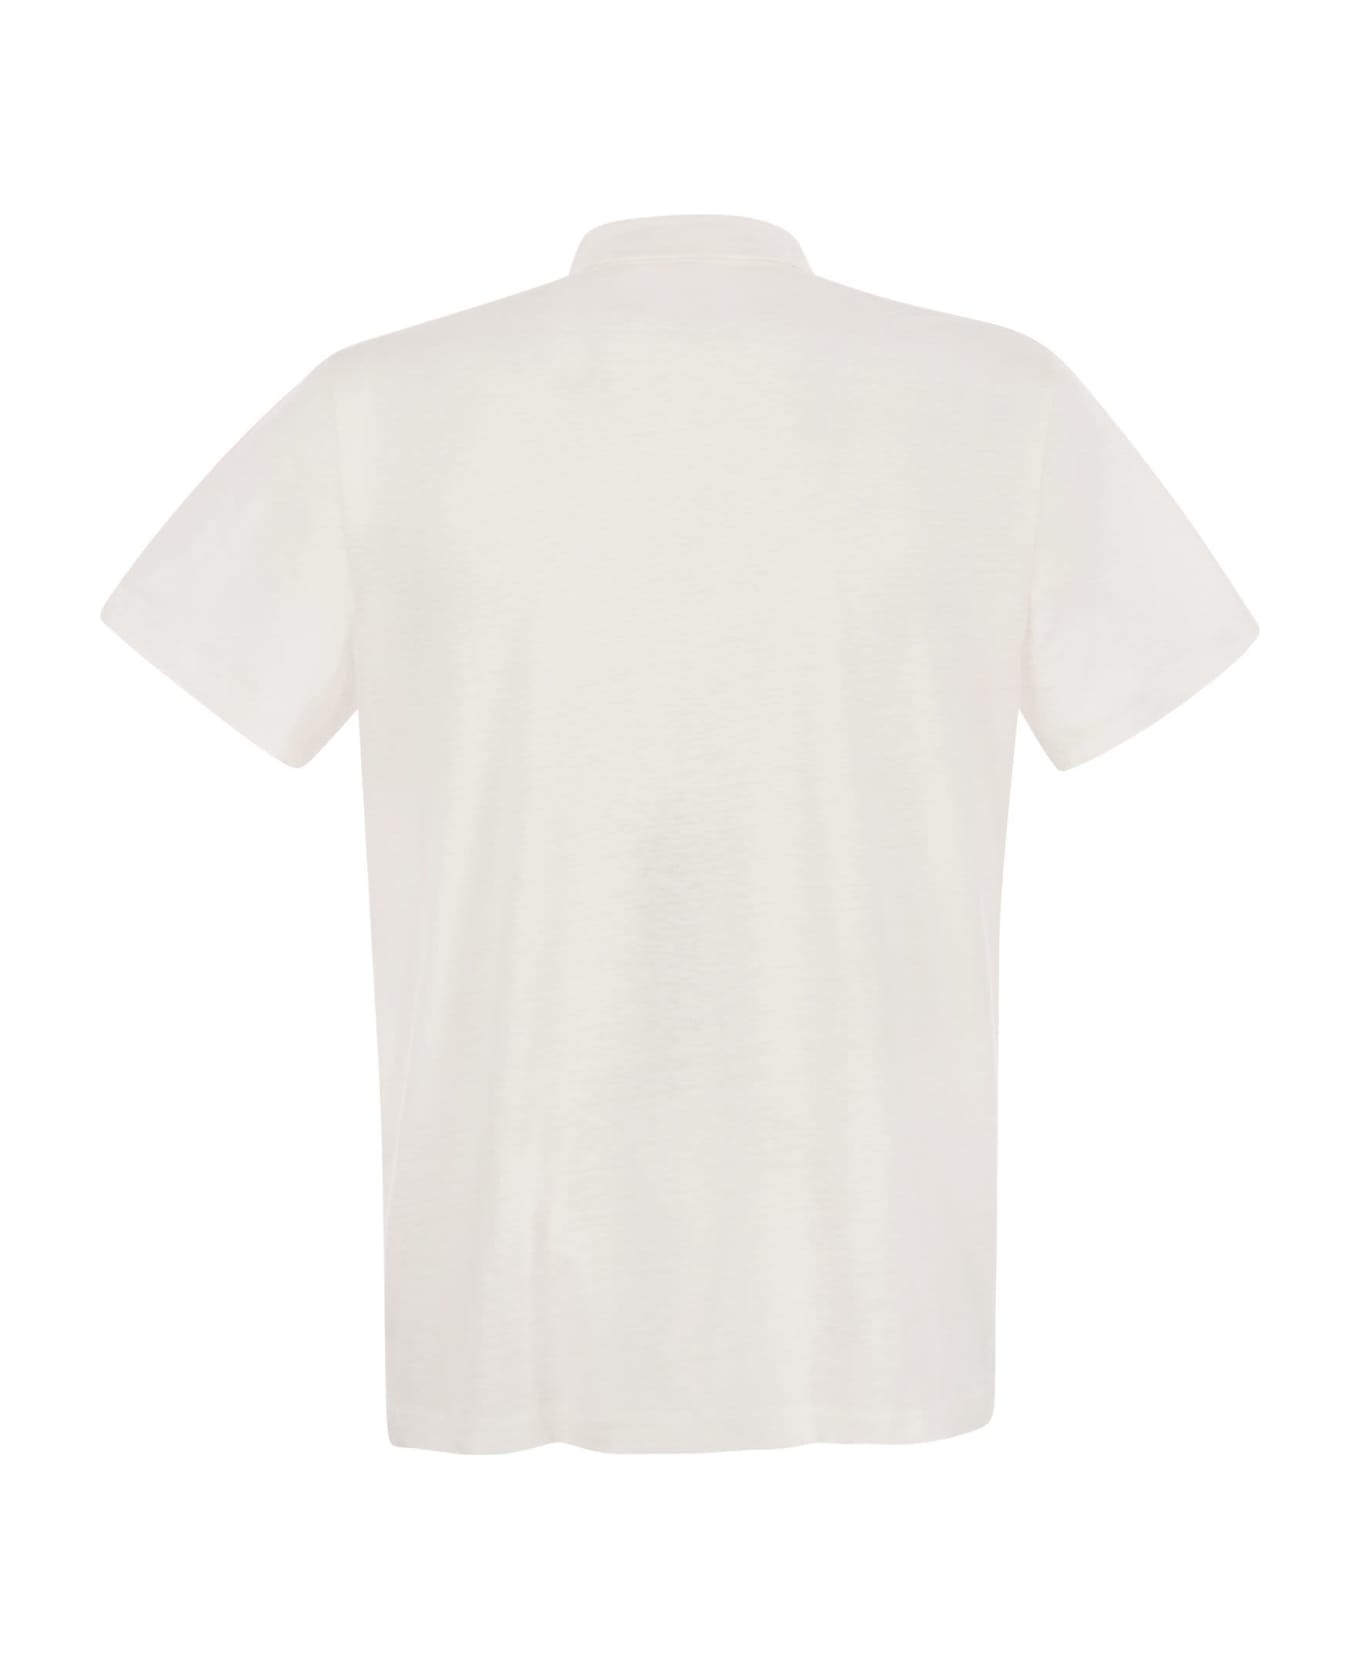 Majestic Filatures Linen Polo Shirt With Buttons - White